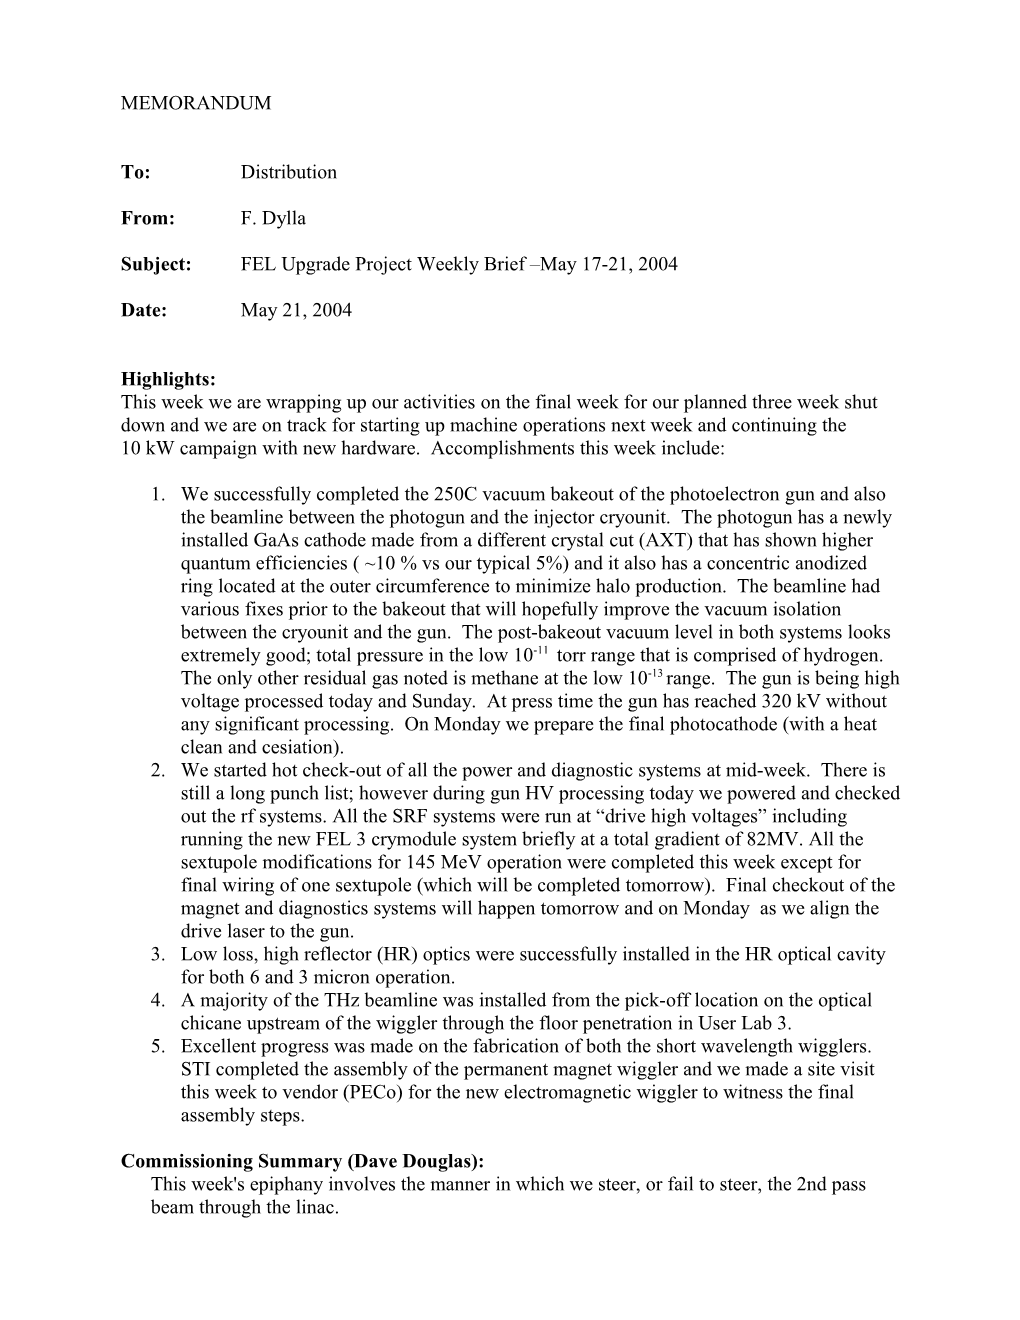 Subject: FEL Upgrade Project Weekly Brief May 17-21, 2004